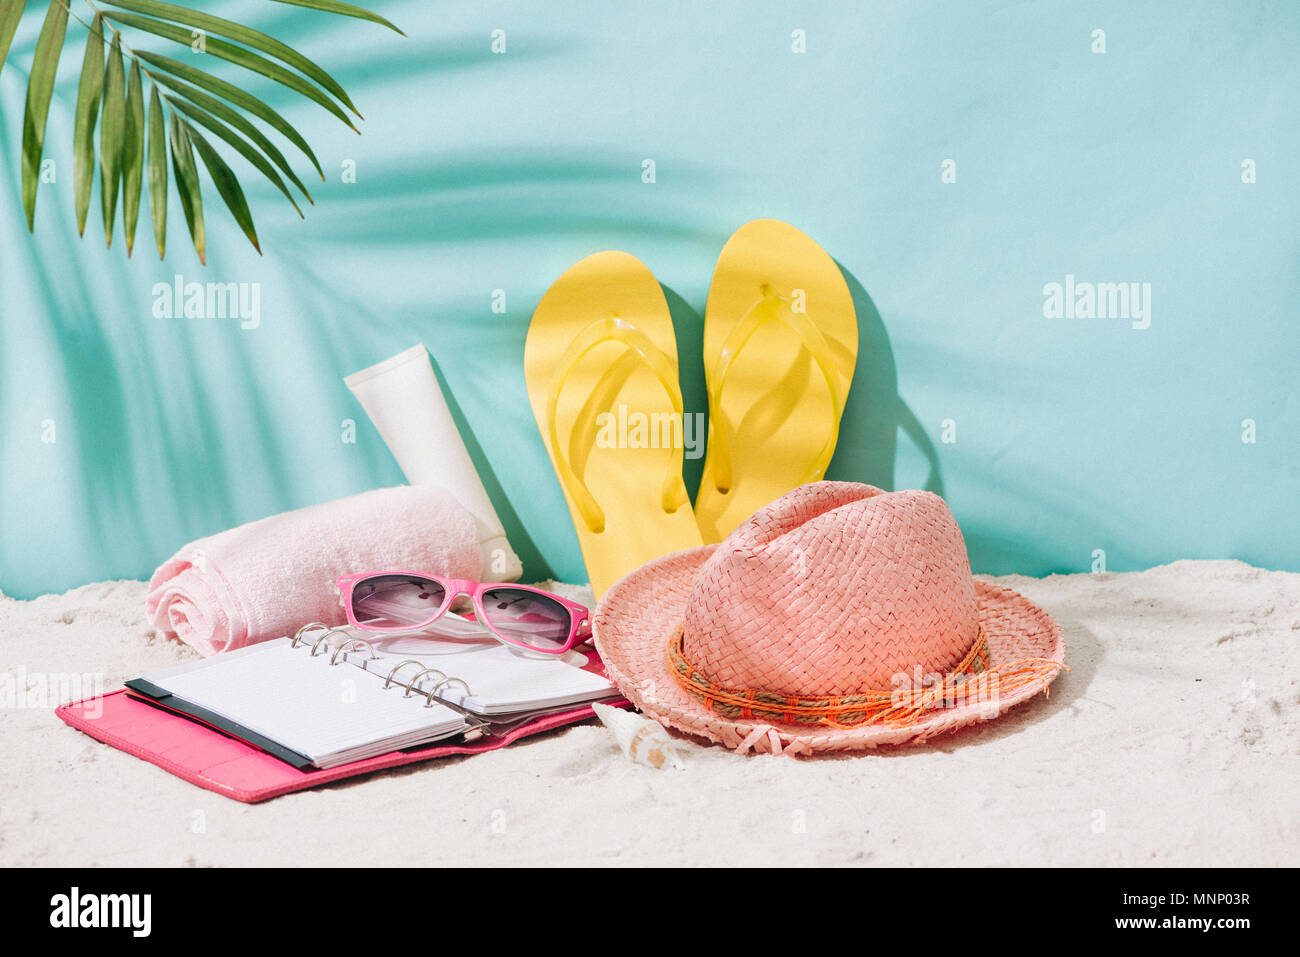 Summer accessories on sandy beach. Summer exotic relaxation concept. Copyspace for text Stock Photo